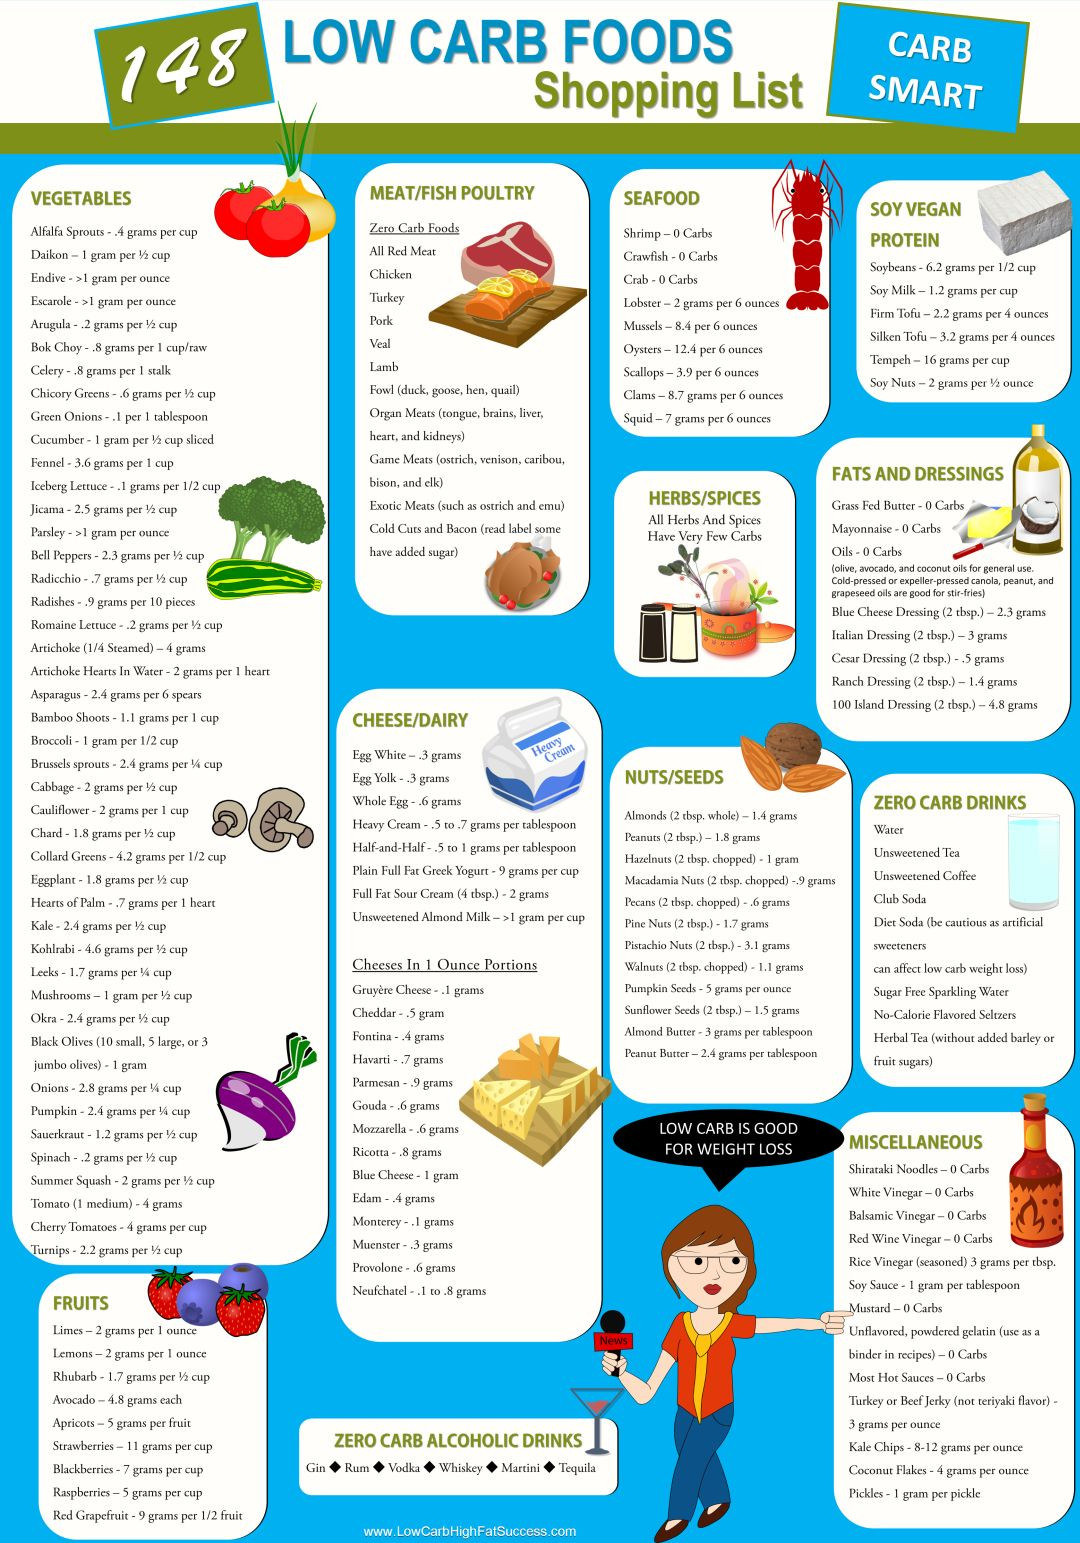 Low Fat Diet Grocery List 148 Low Carb Foods Shopping List Infographic Low Carb